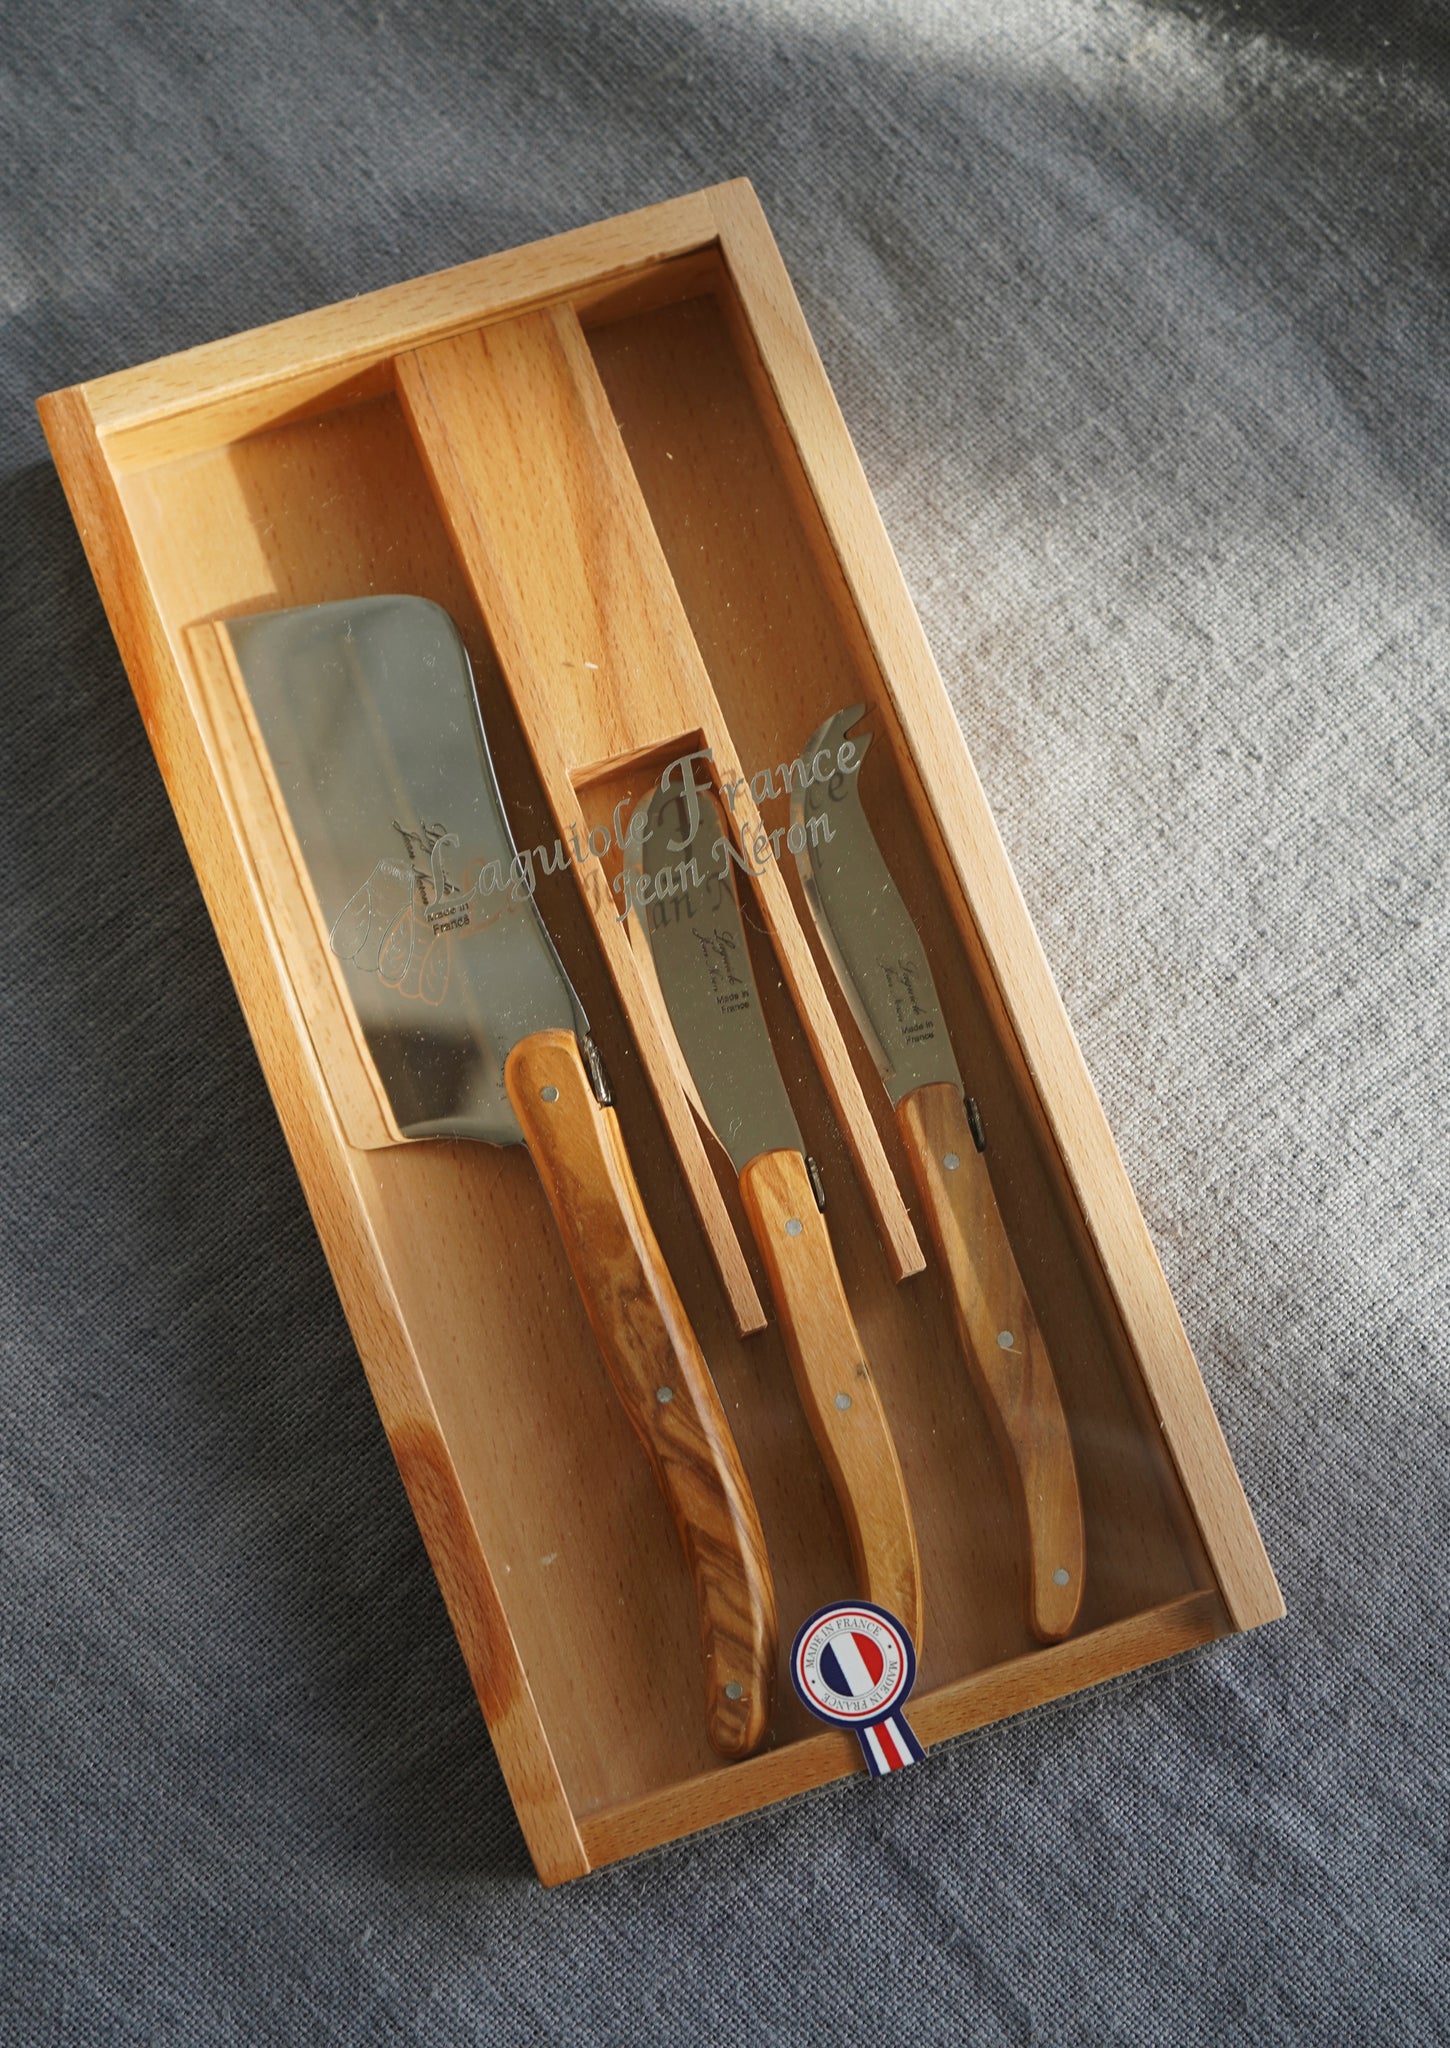 Large olive wood cheese set from Laguiole